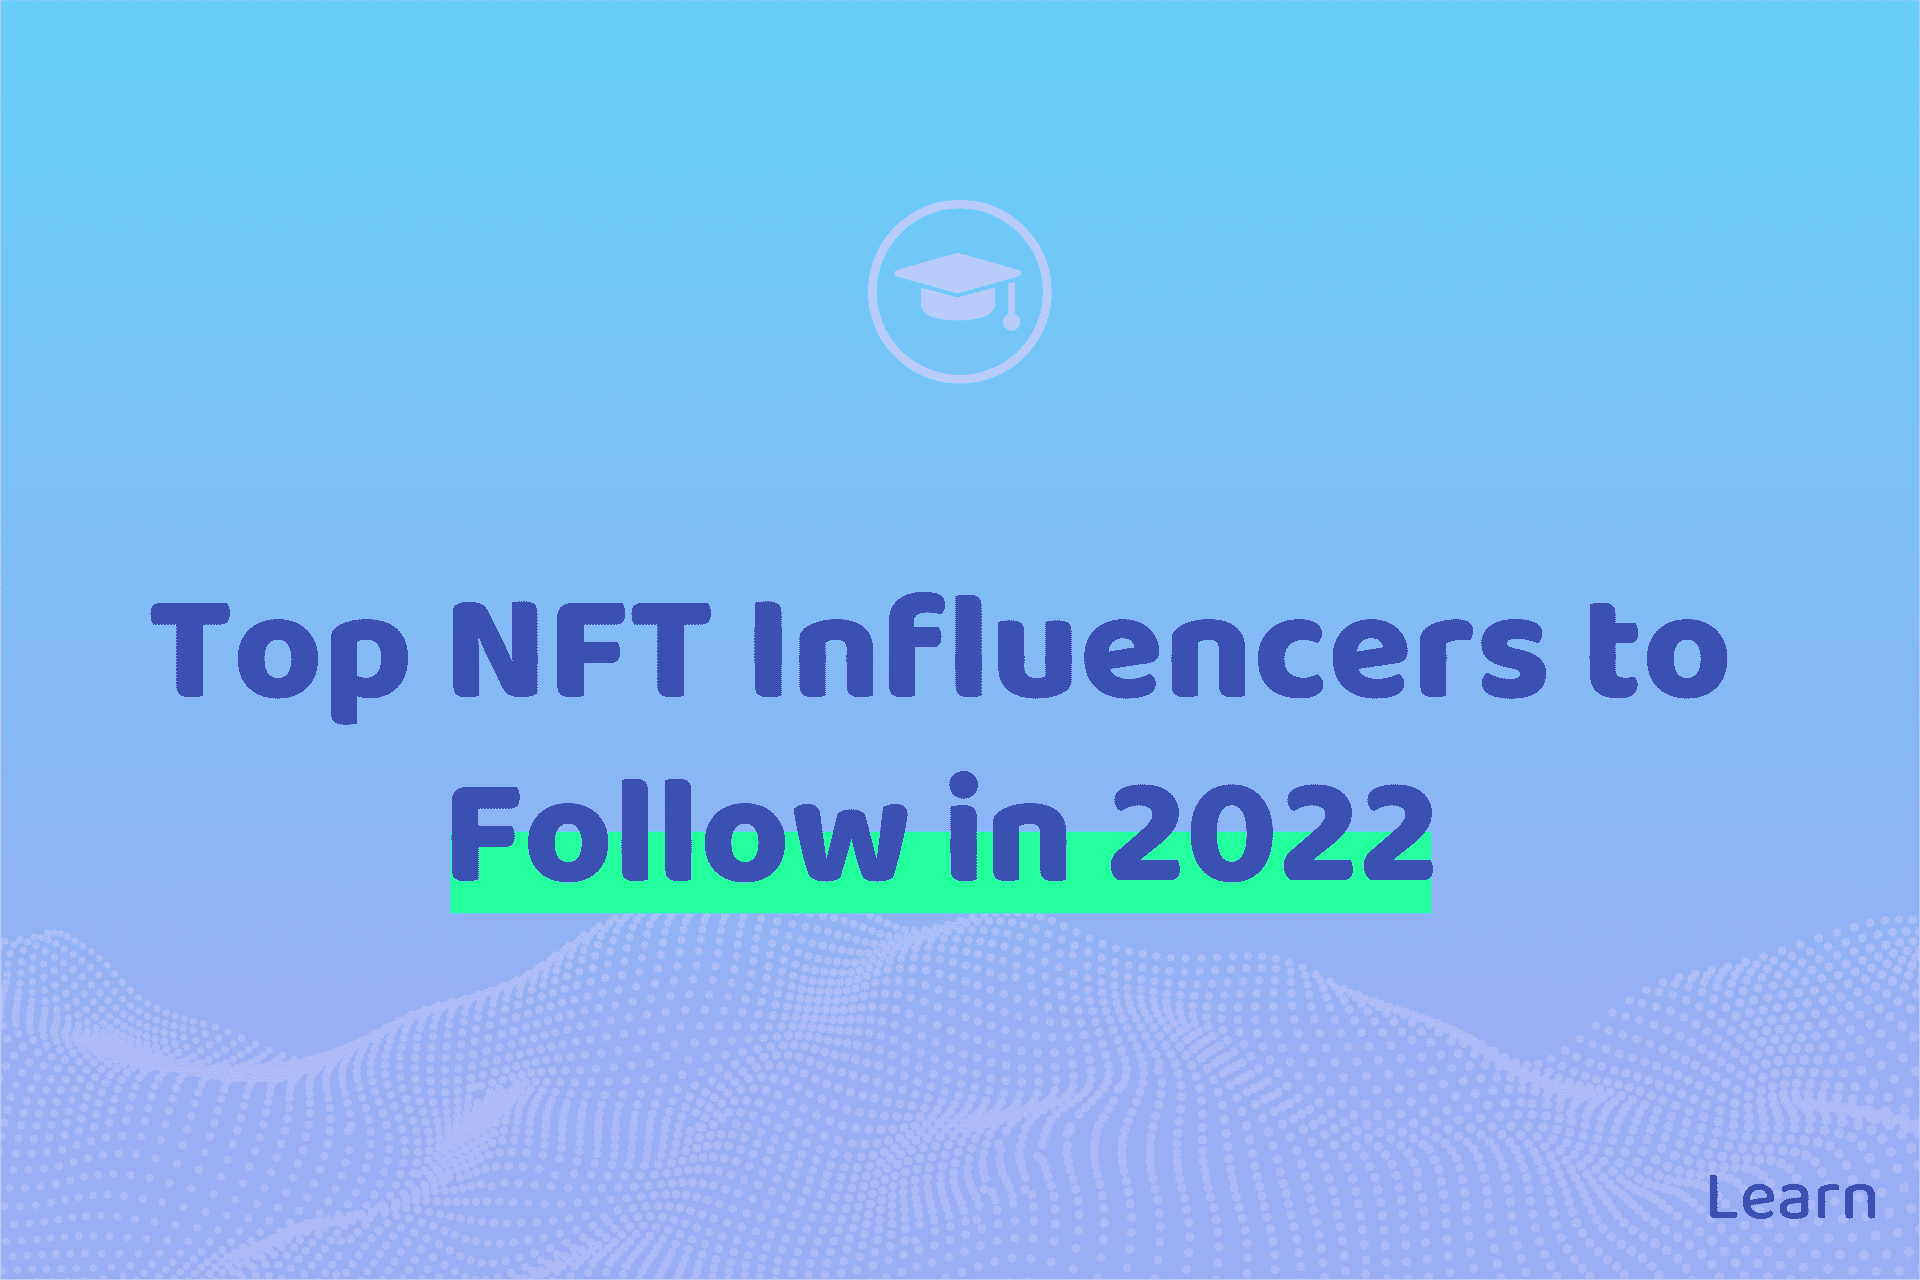 Top NFT Influencers to Follow in 2022